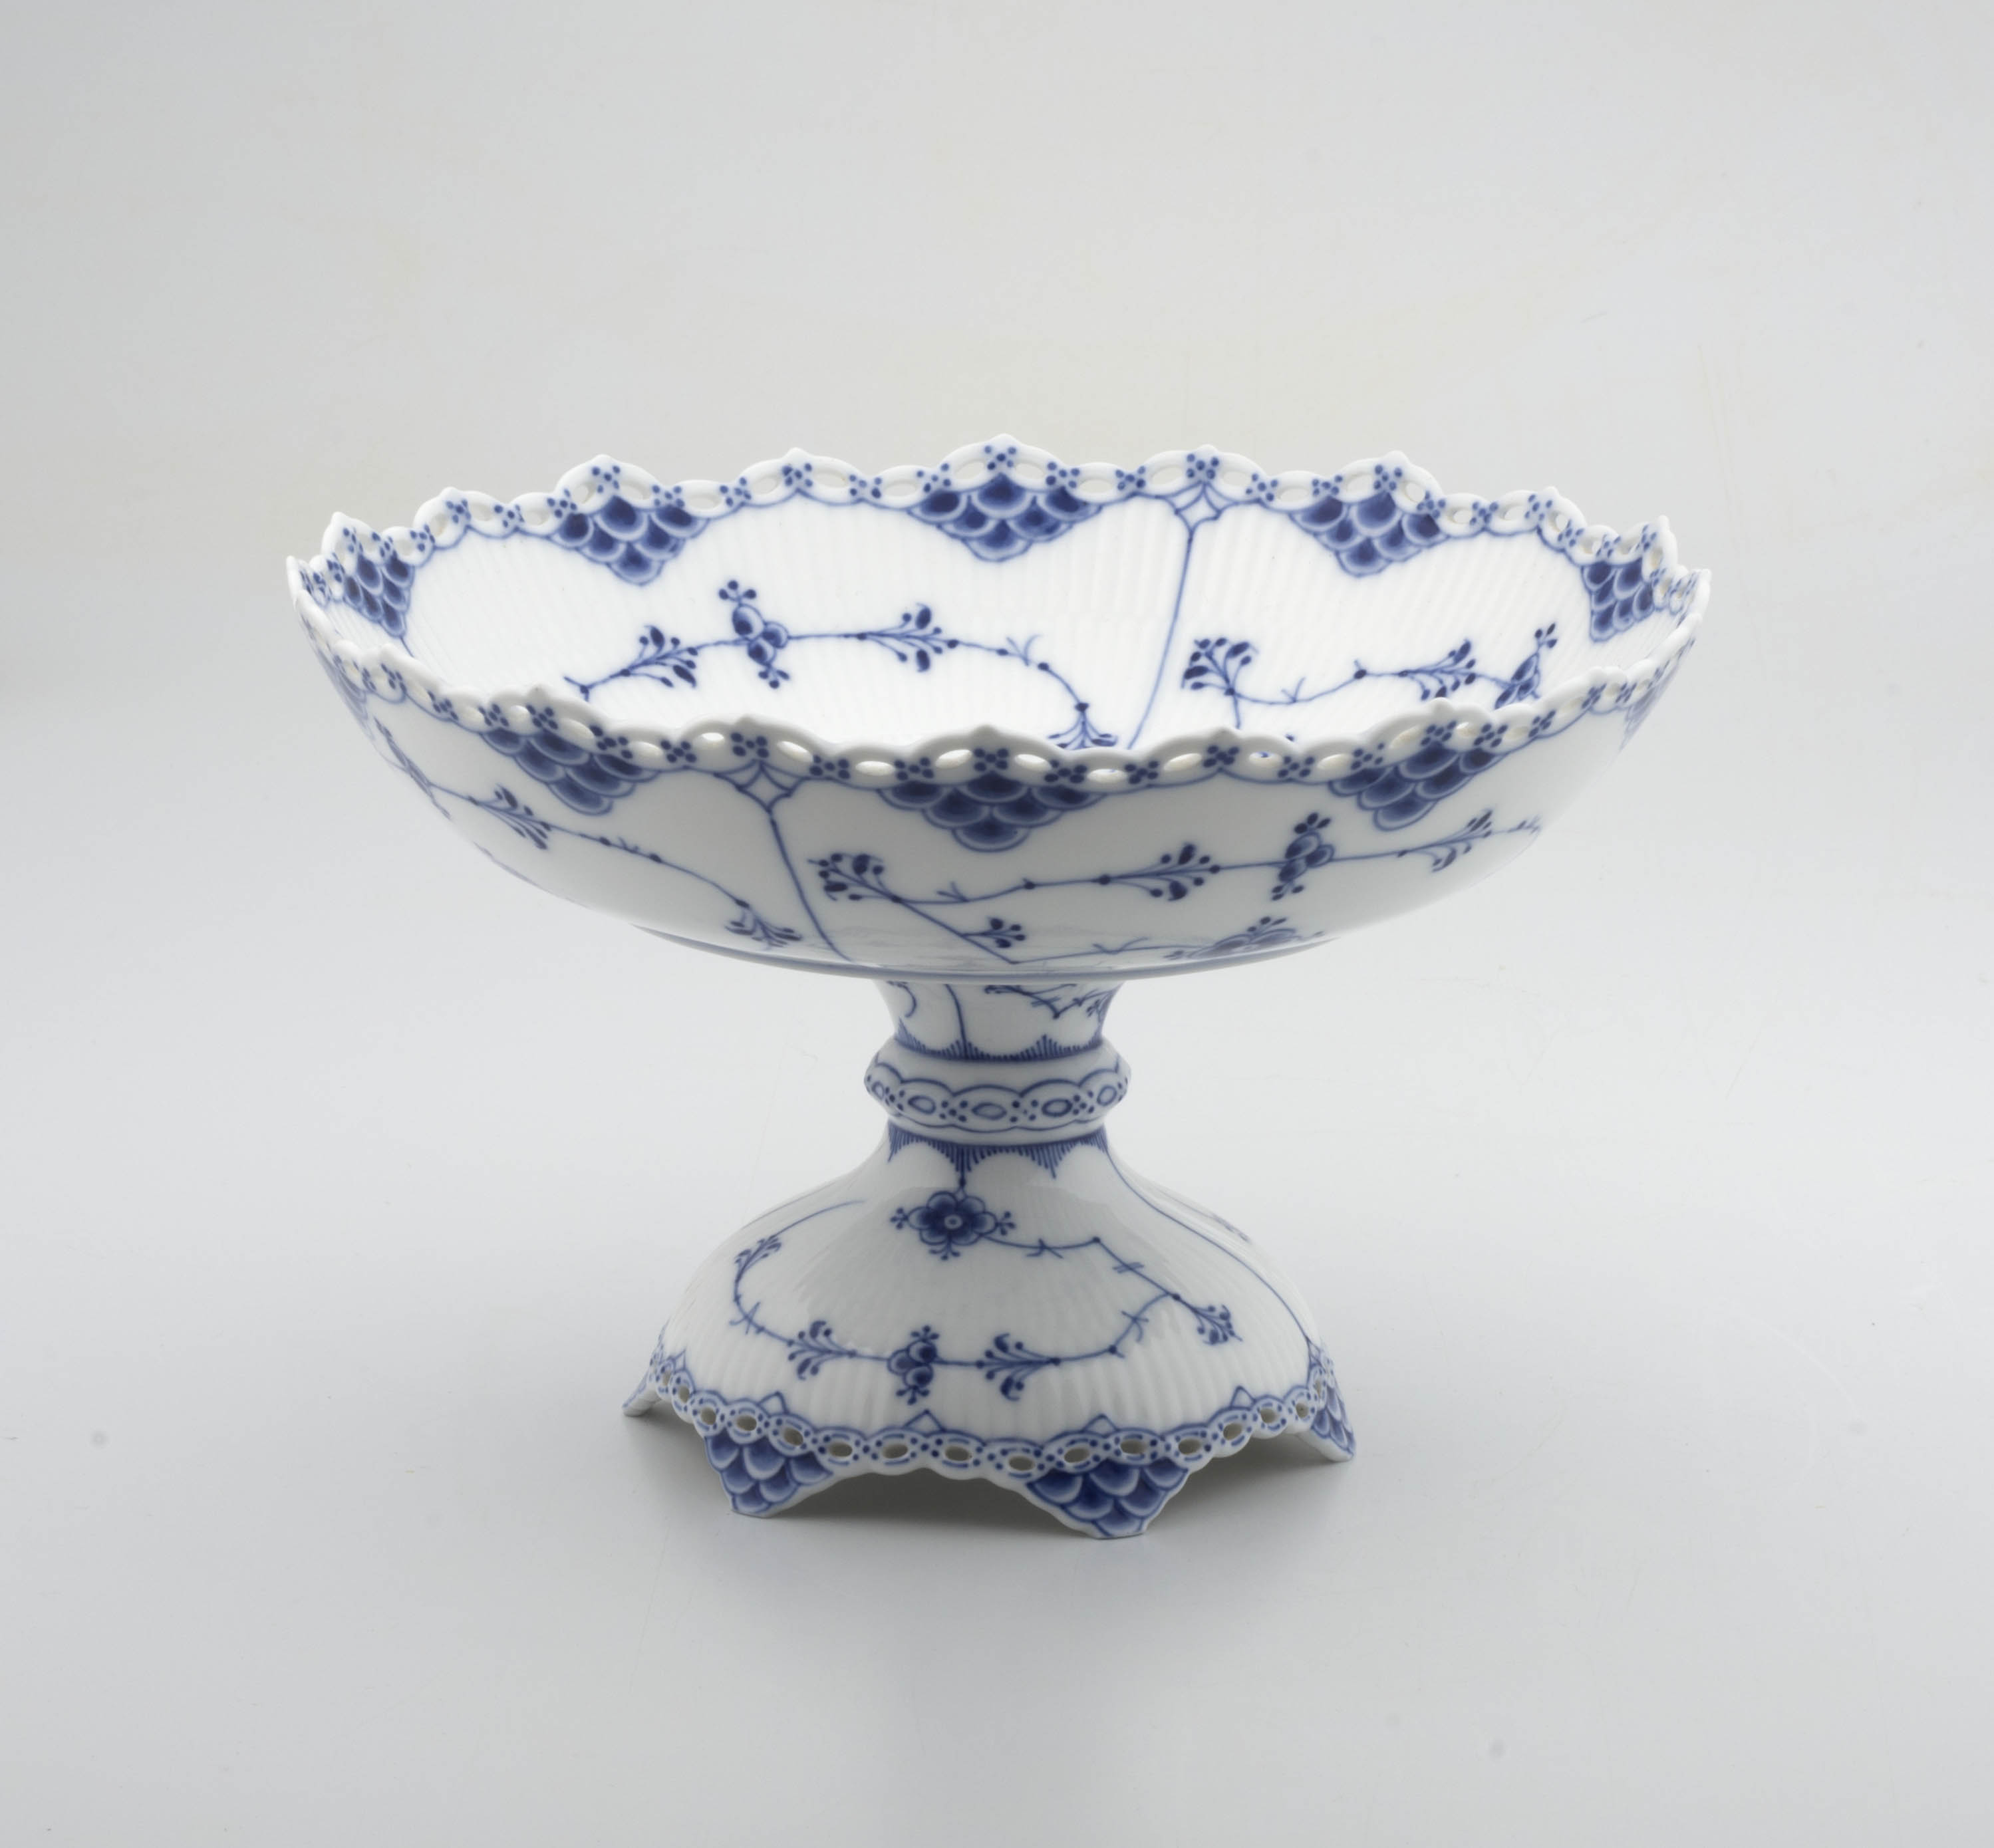 A Royal Copenhagen Blue Fluted Full Lace pattern dish on stand, 1899-1922